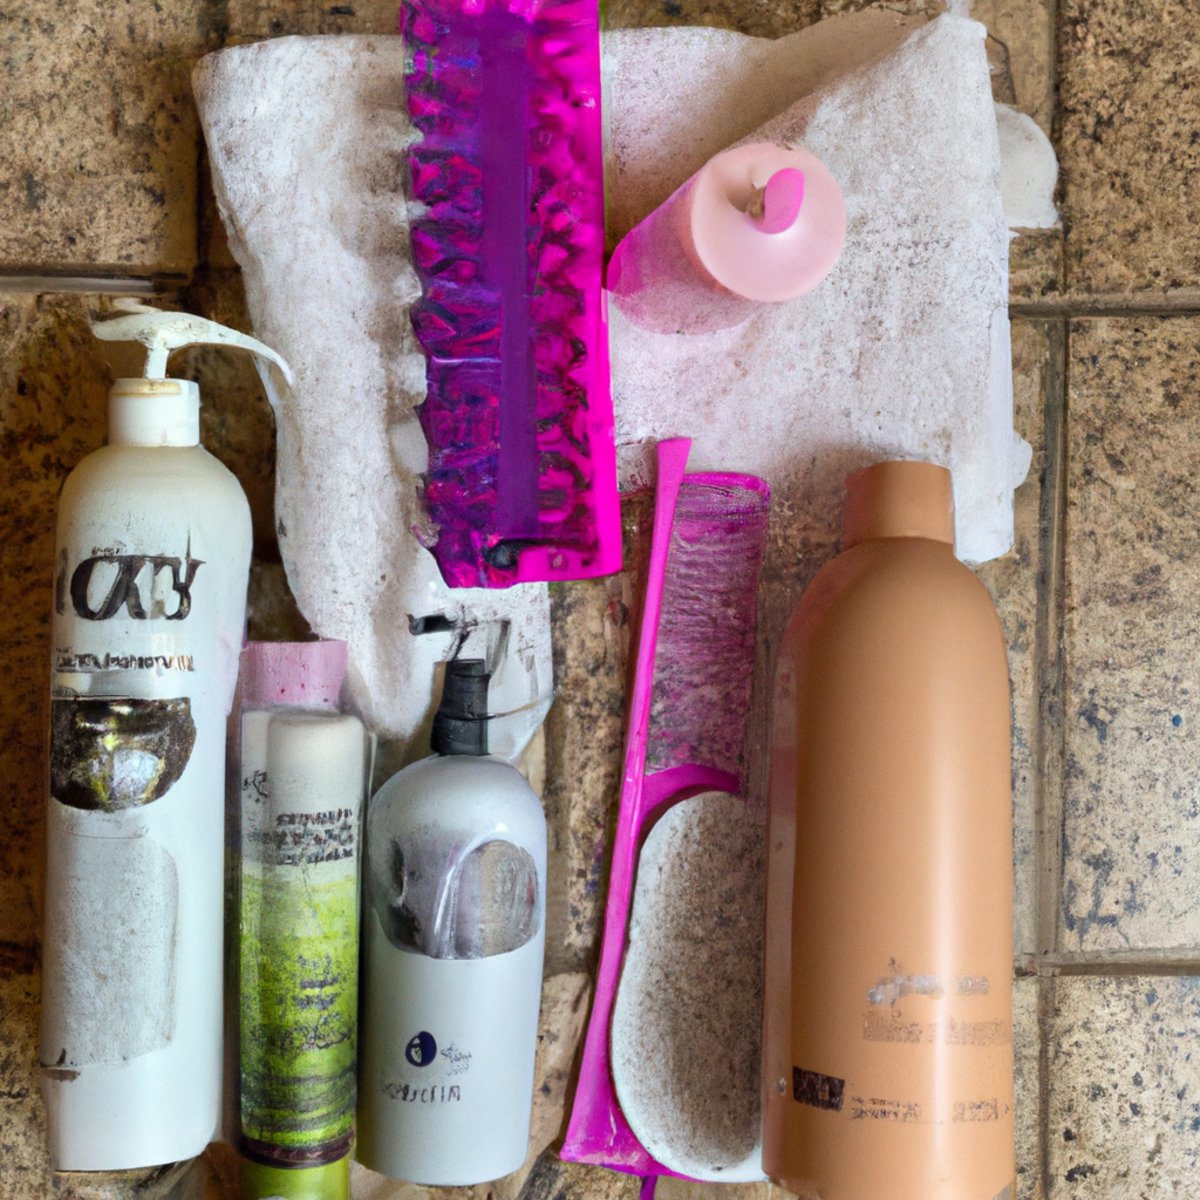 Curly haircare products, including shampoo, conditioner, styling products, comb, and diffuser attachment, on a towel.